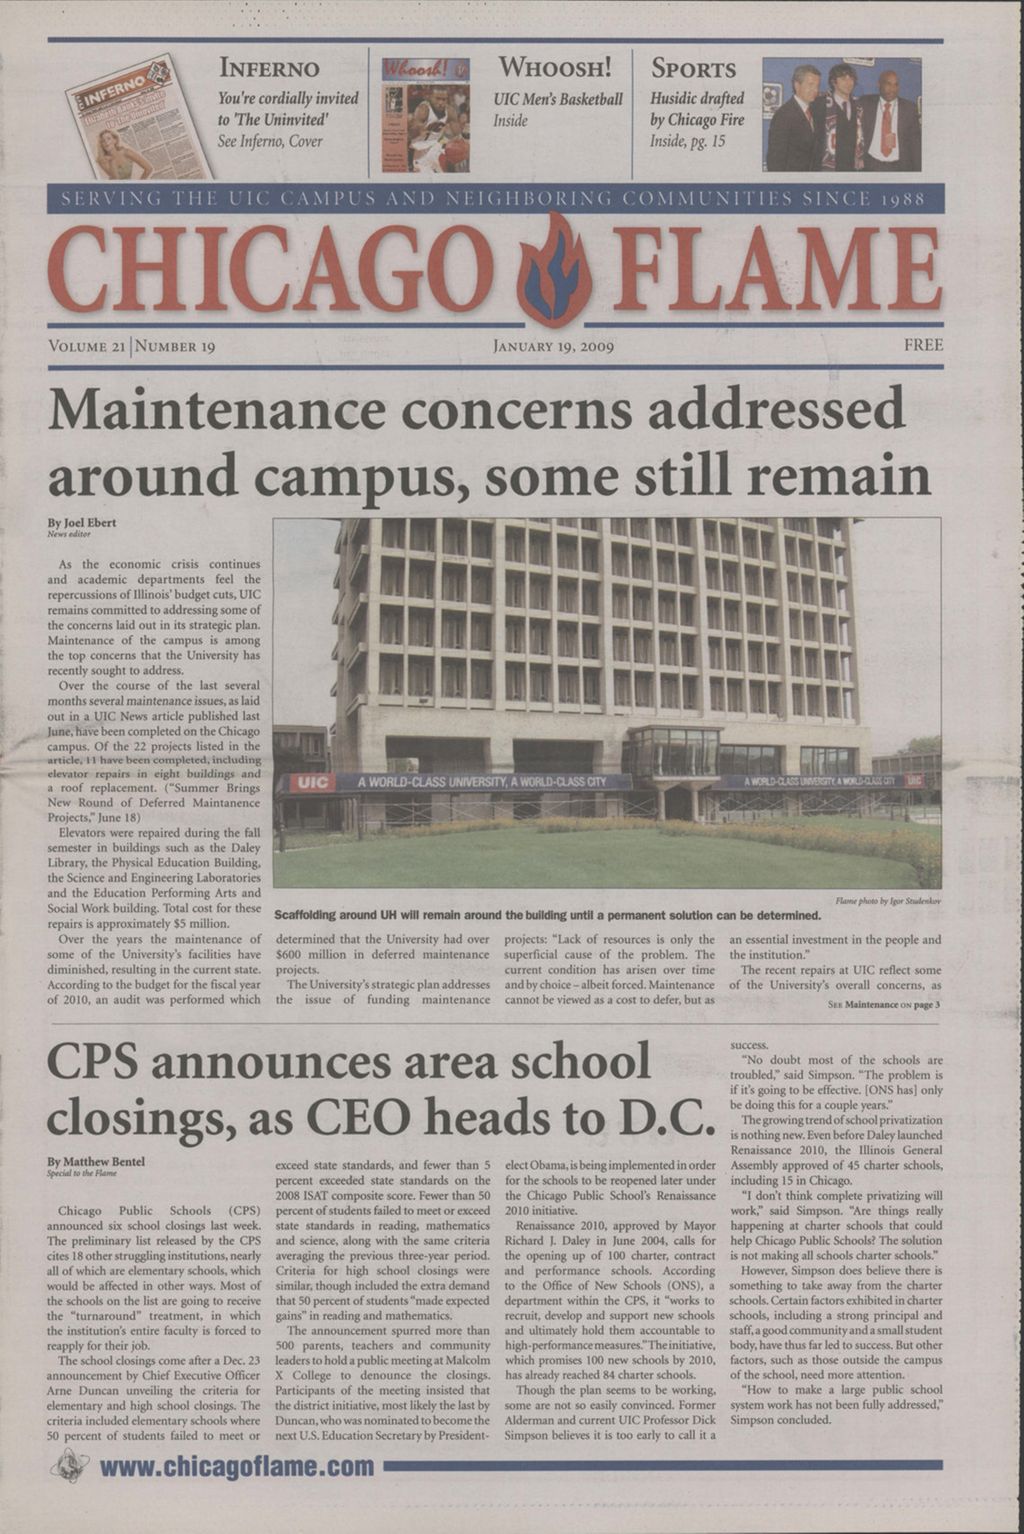 Miniature of Chicago Flame (January 19, 2009)